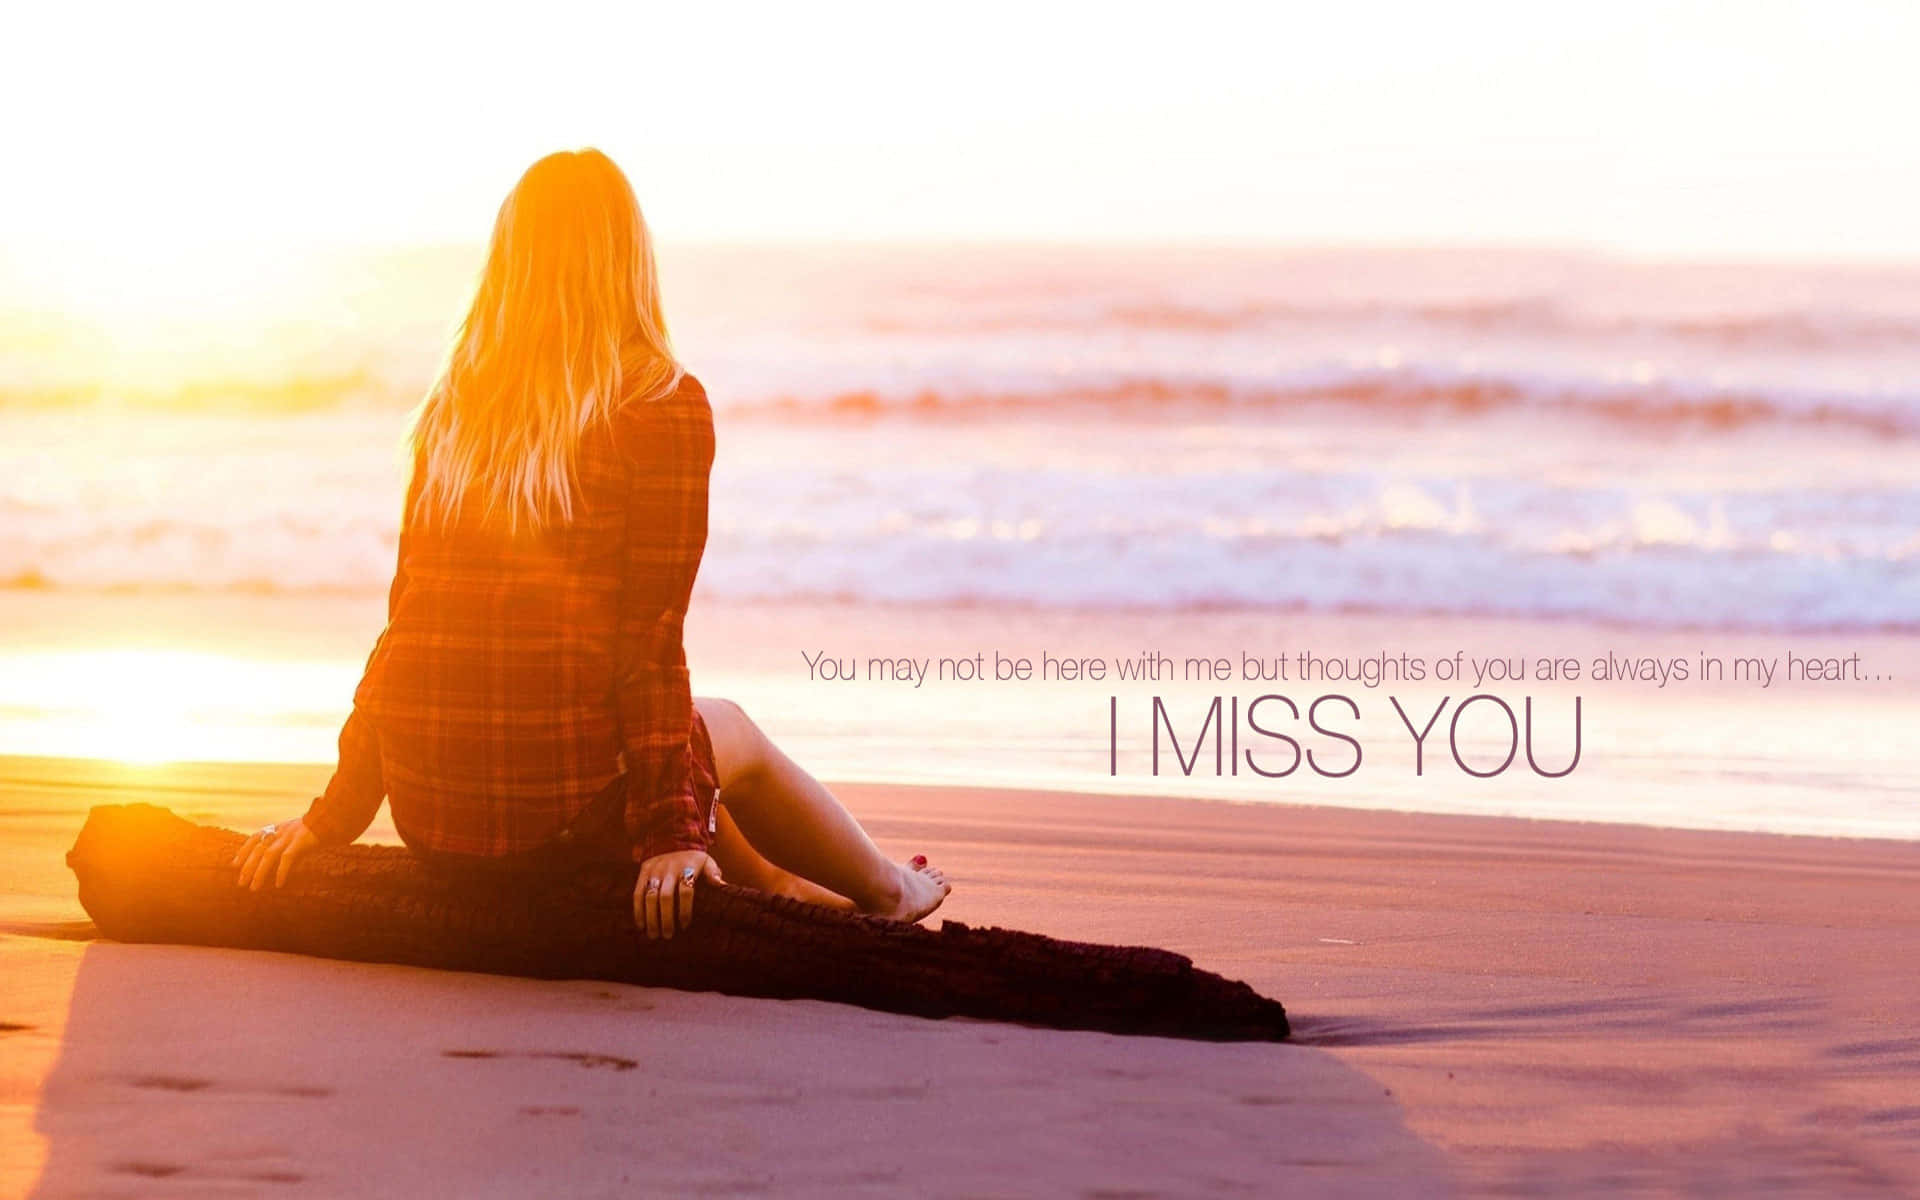 Loving Couple Embracing in a Park - "I Miss You" Wallpaper